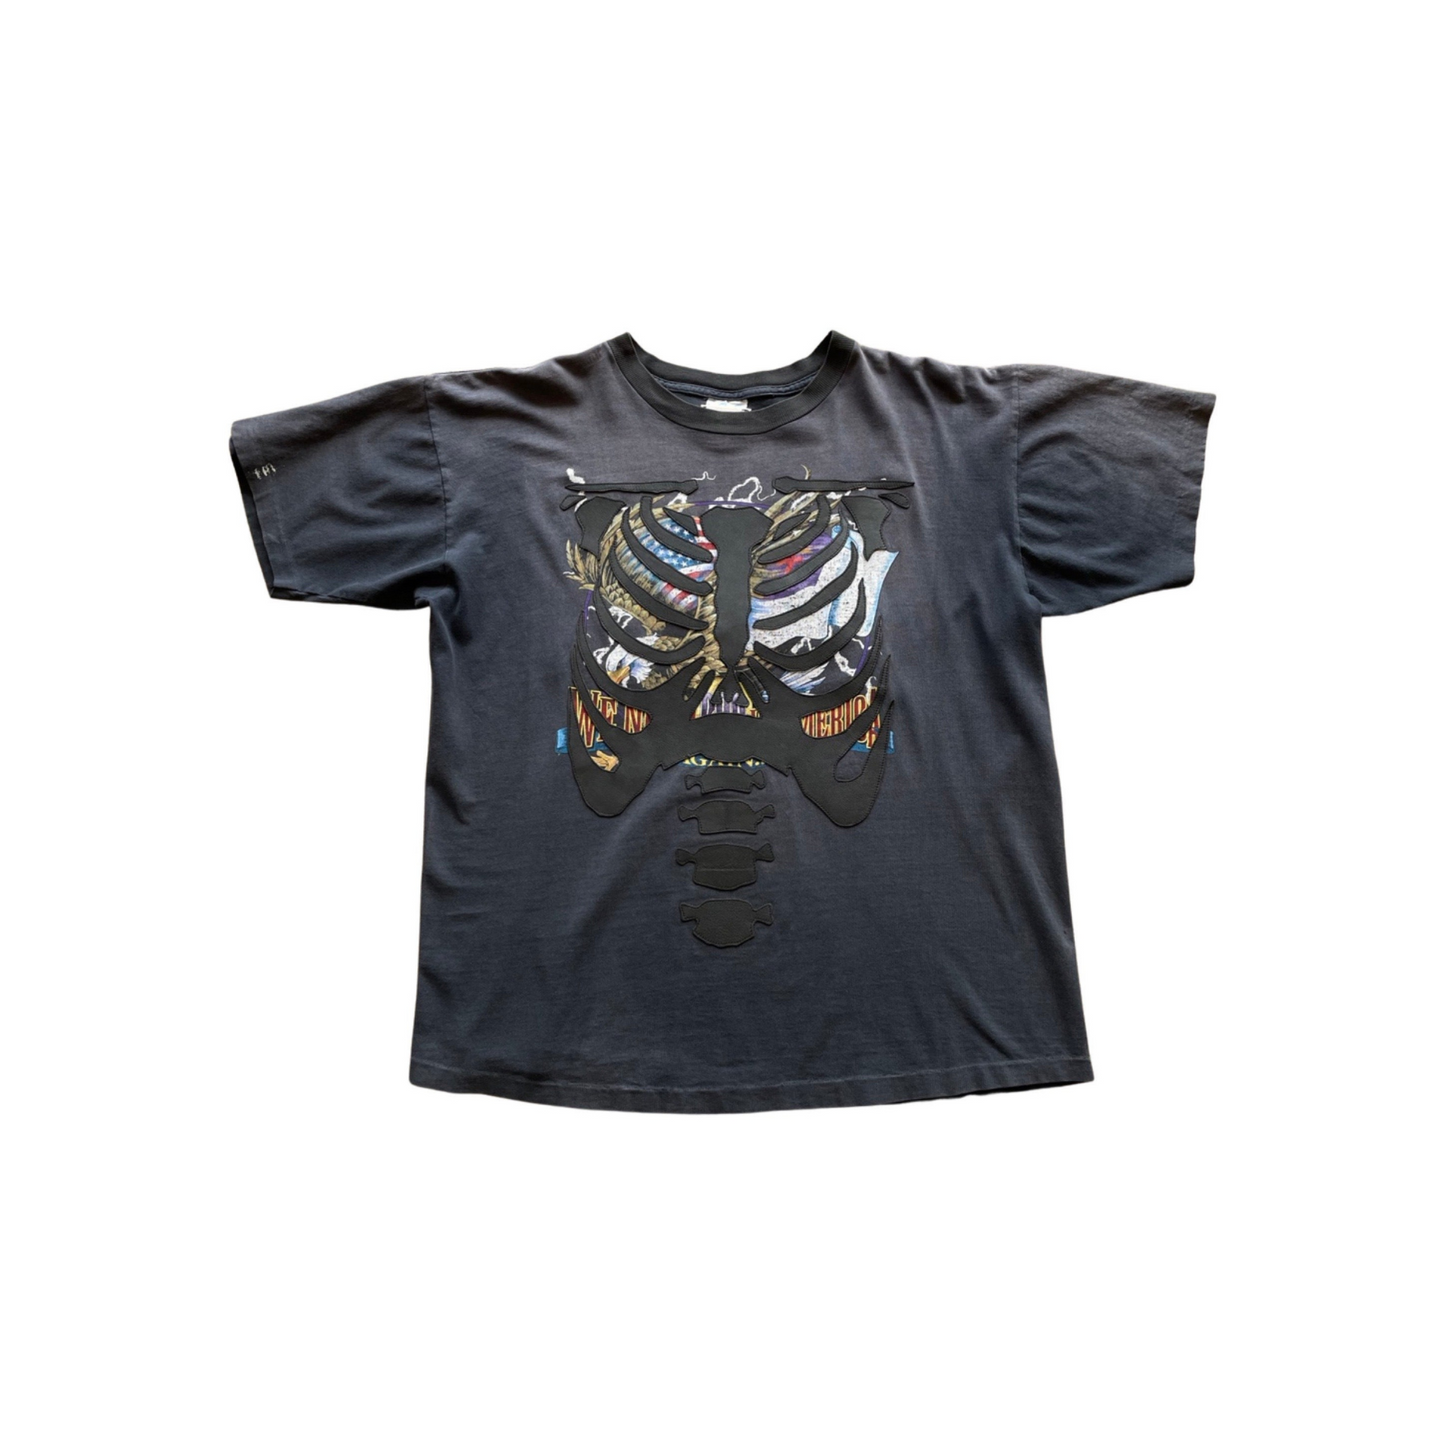 American Thunder T-shirt with Leather Ribcage Appliqué